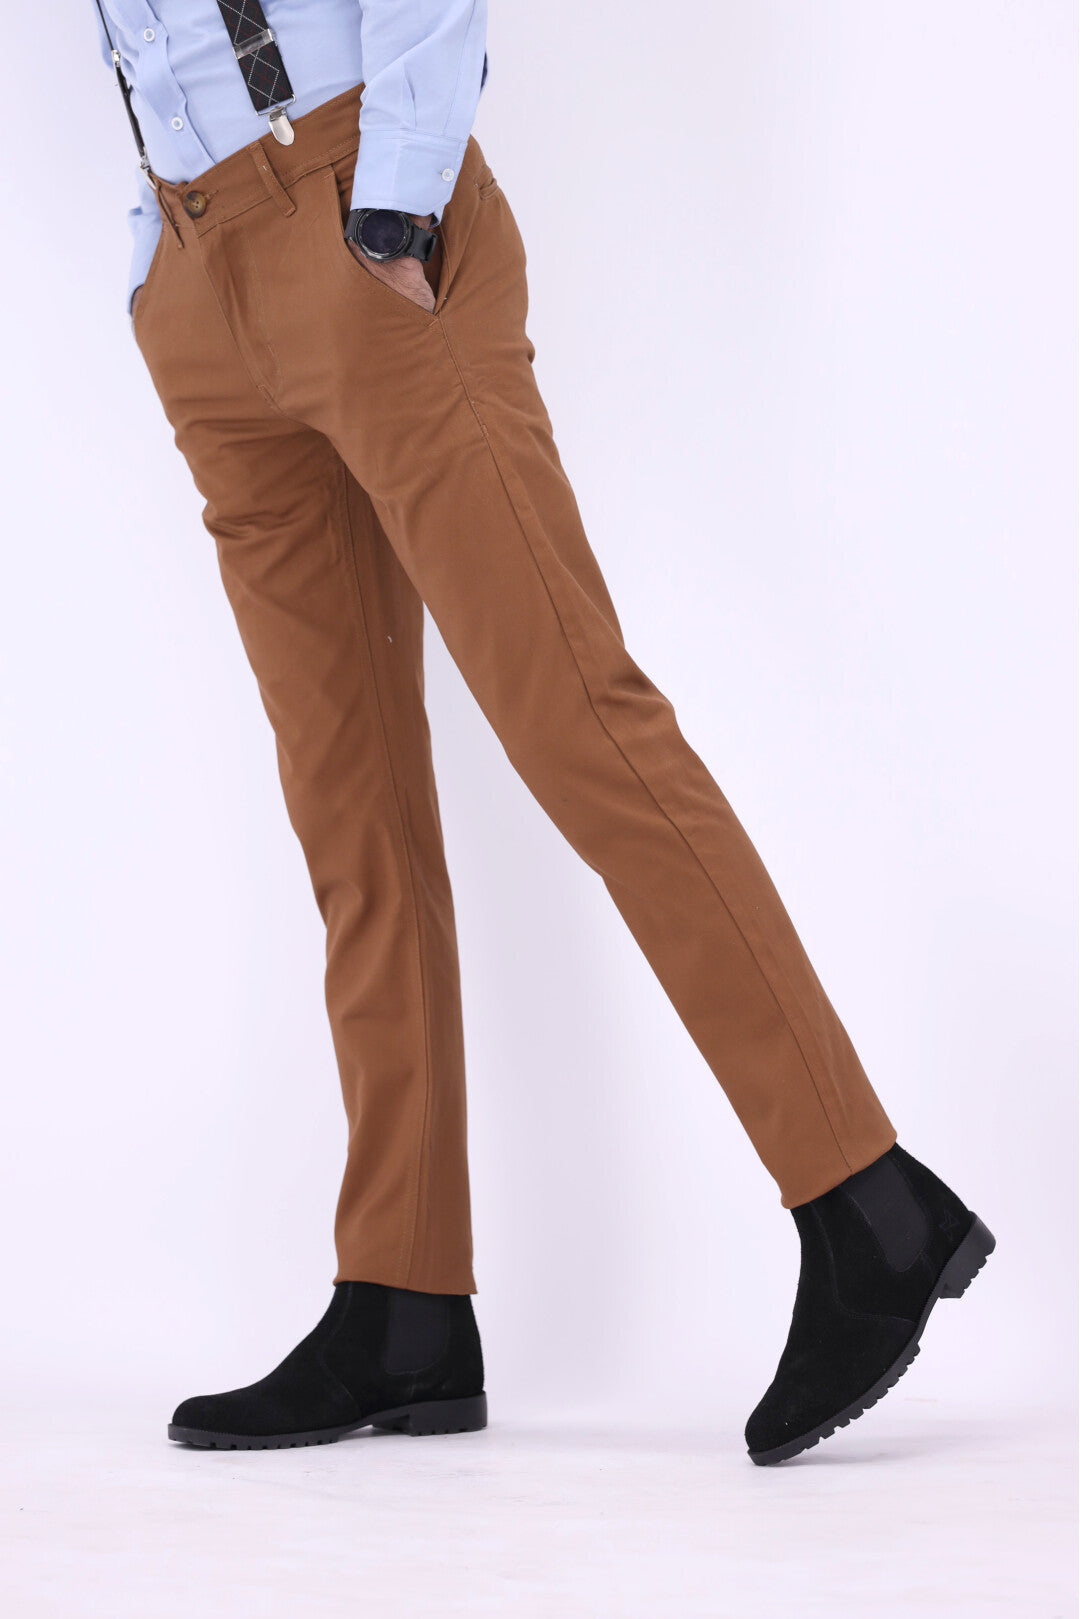 FT Cotton Chinos Pant - Otter Brown